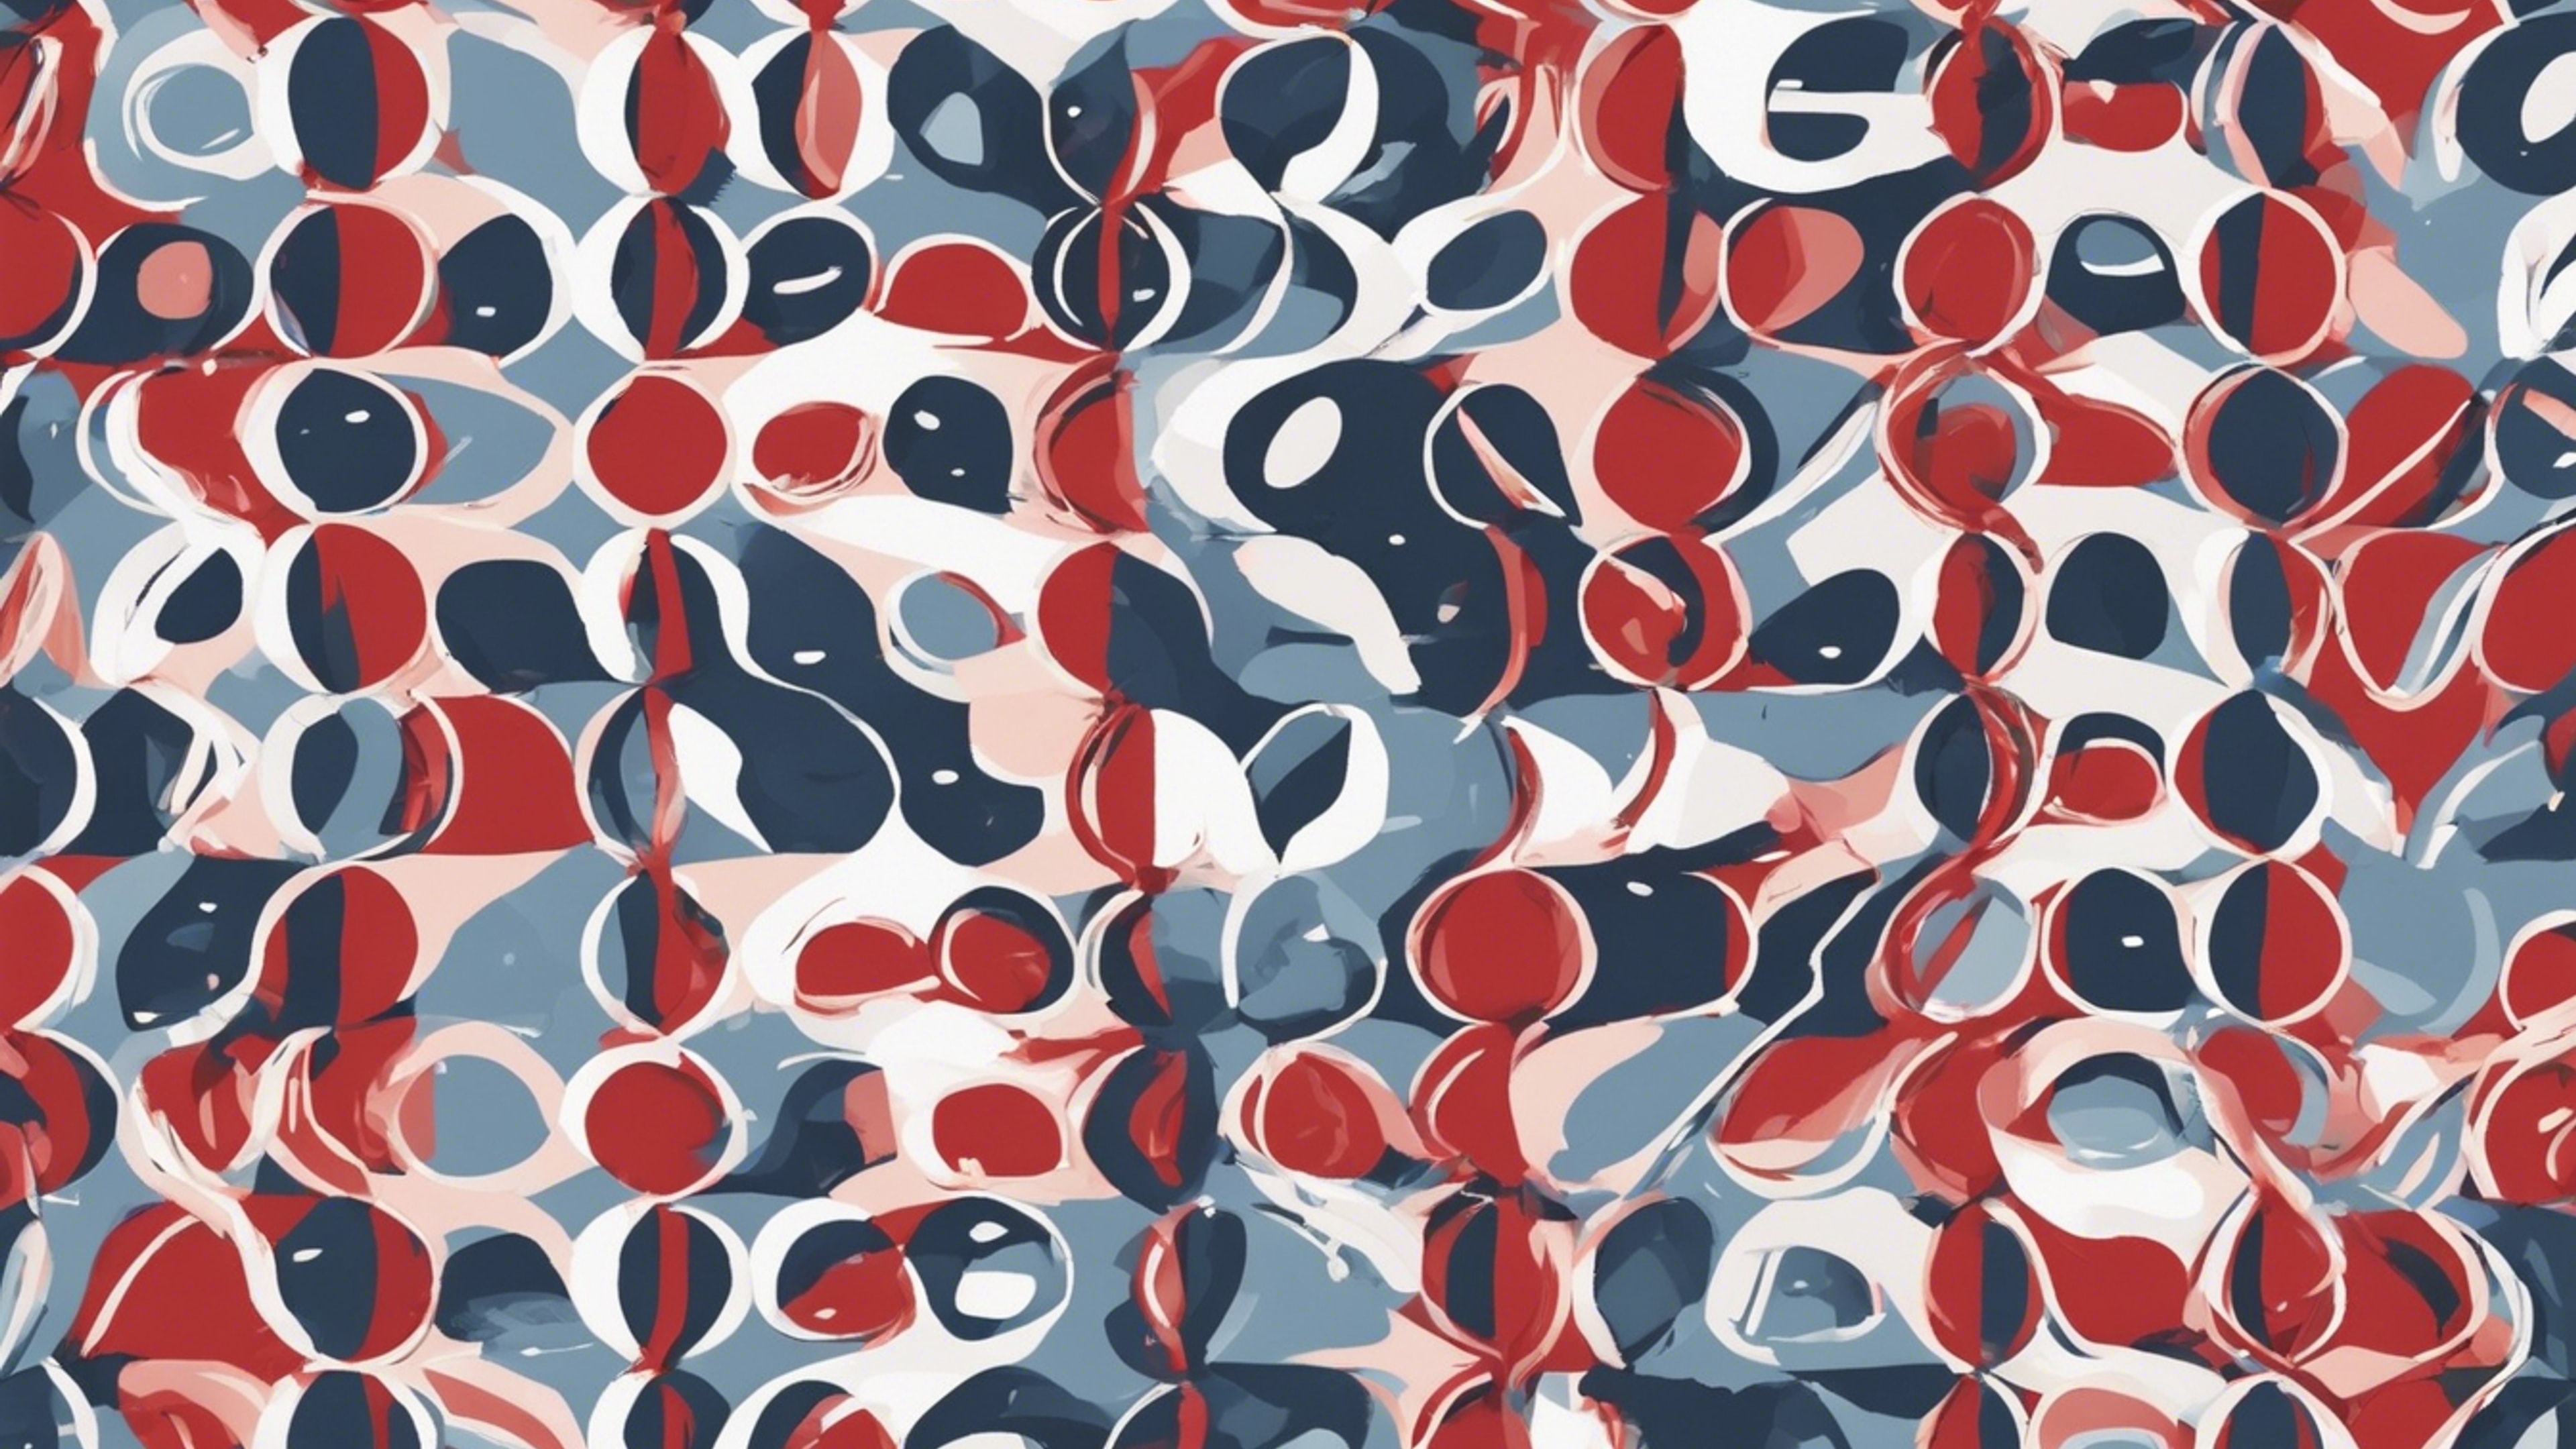 Simple and clean Scandinavian red and blue pattern. Tapéta[367ad8fa403444a2bdd2]